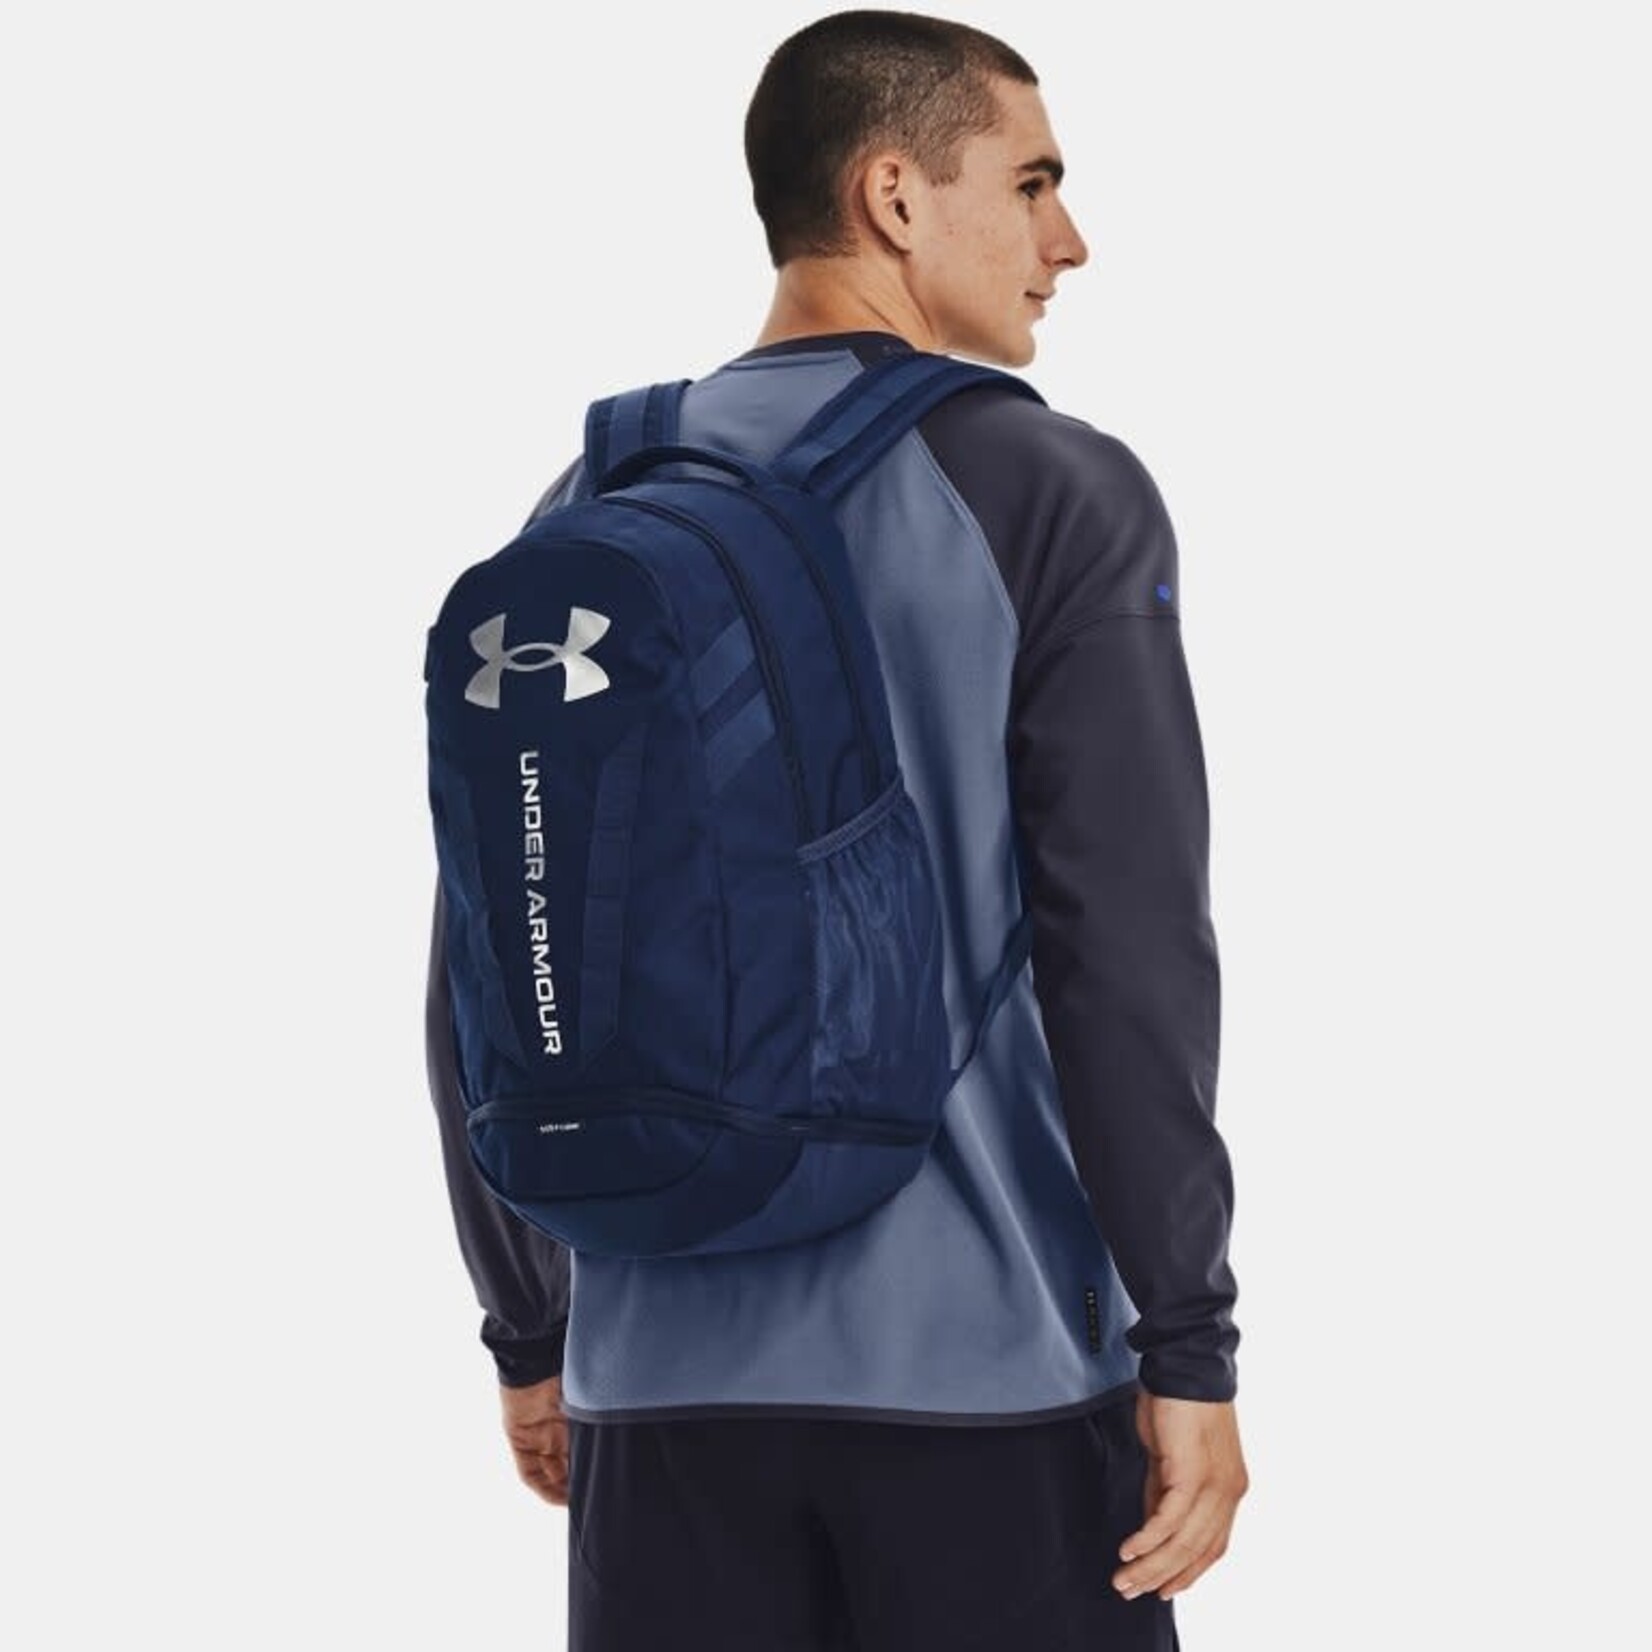 Under Armour Under Armour Backpack, Hustle 5.0